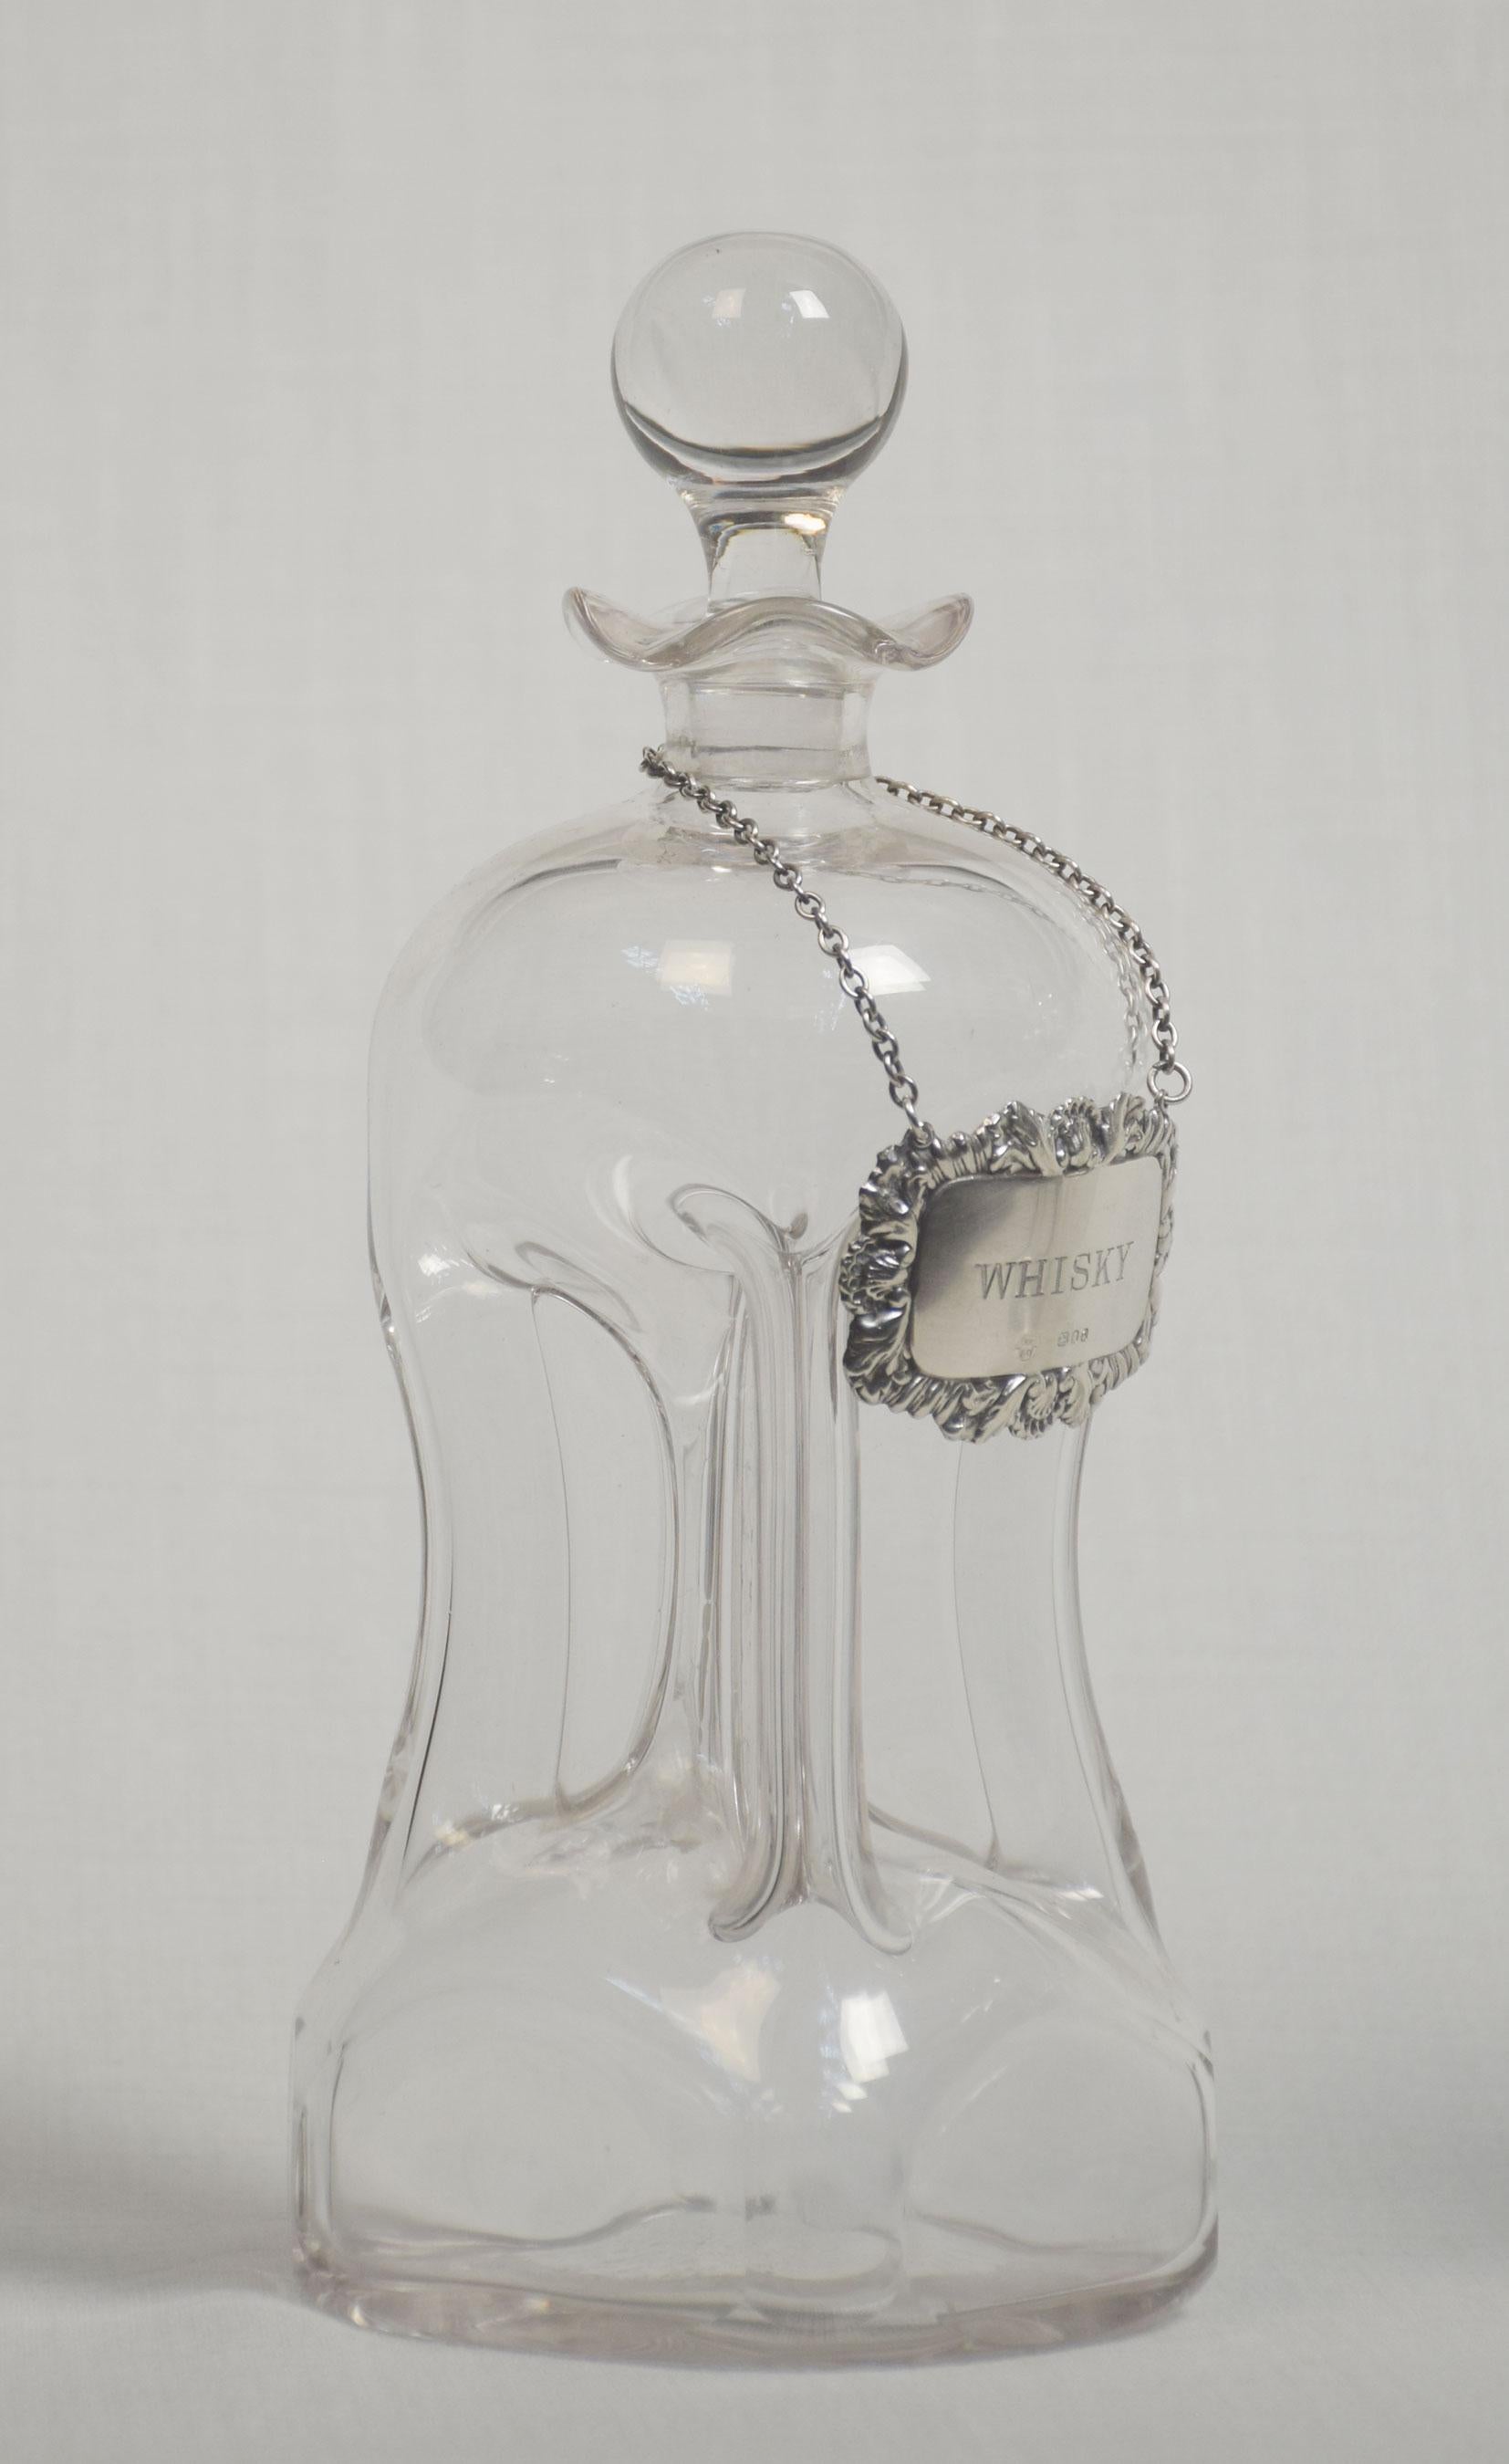 Pair of glass decanters with stoppers and each with a Birmingham silver ‘Whisky’ decanter label.
Dimensions
Height 9.5 Inches
Width 4 Inches
Depth 4 Inches